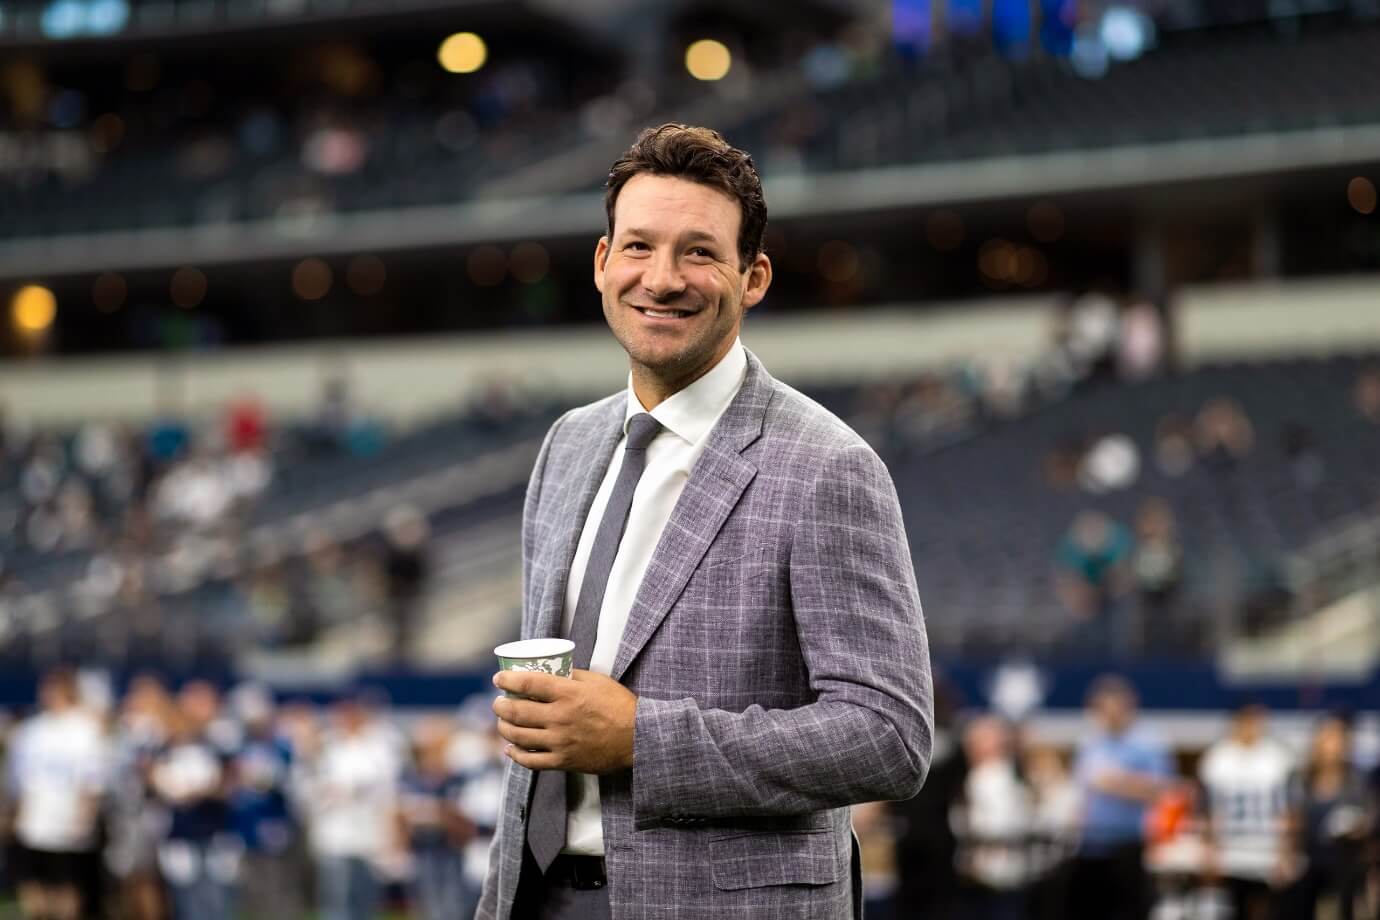 Does Tony Romo Wear a Toupee? Lordhair Investigates